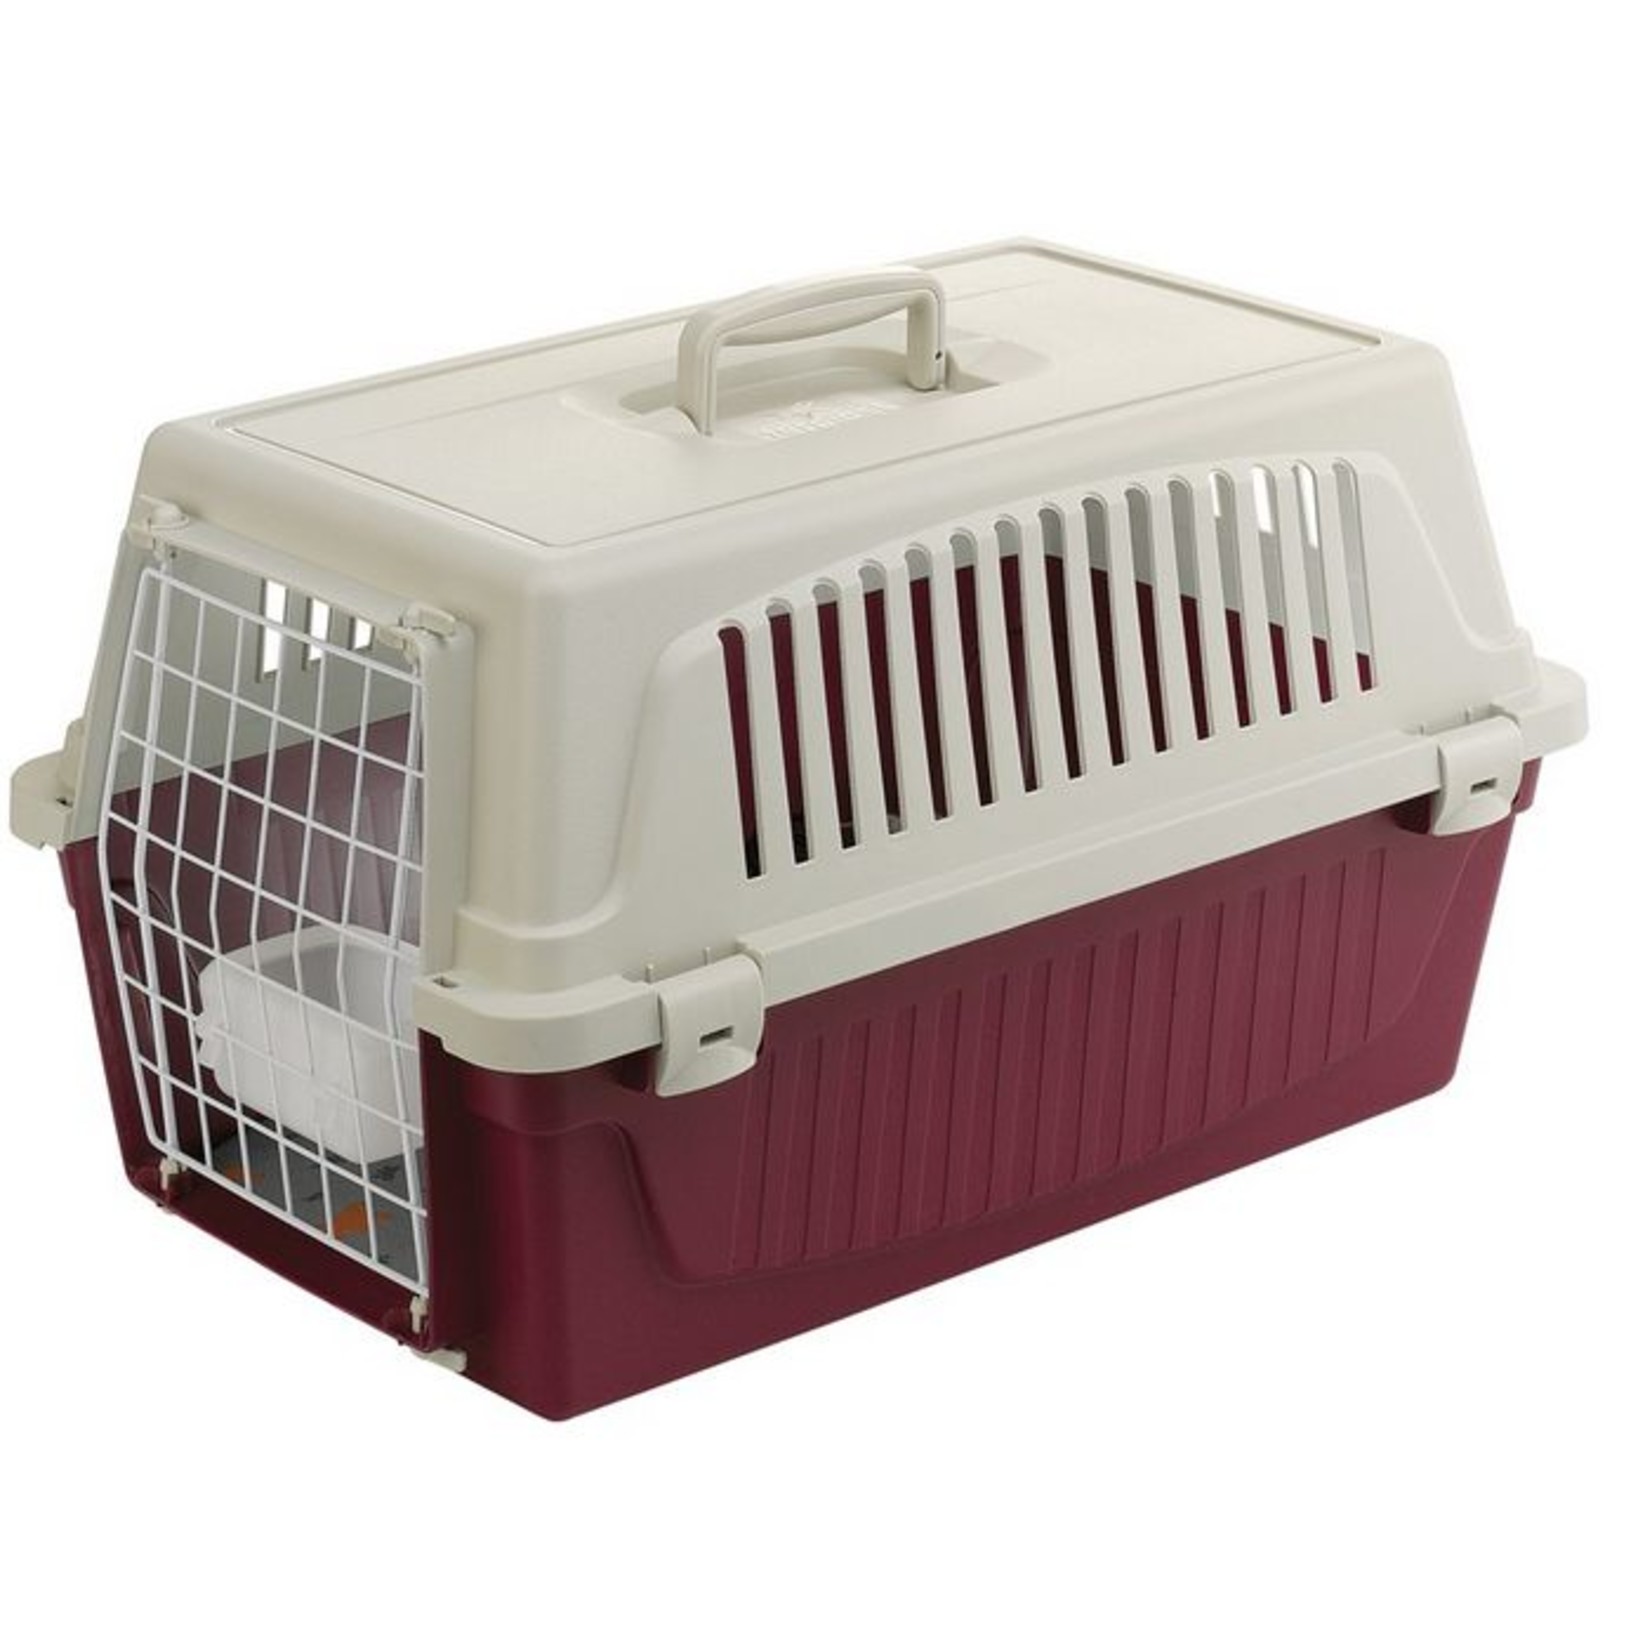 Ferplast Atlas 20 Carrier for Cats, Small Dogs & Small Animals 58x37x32cm